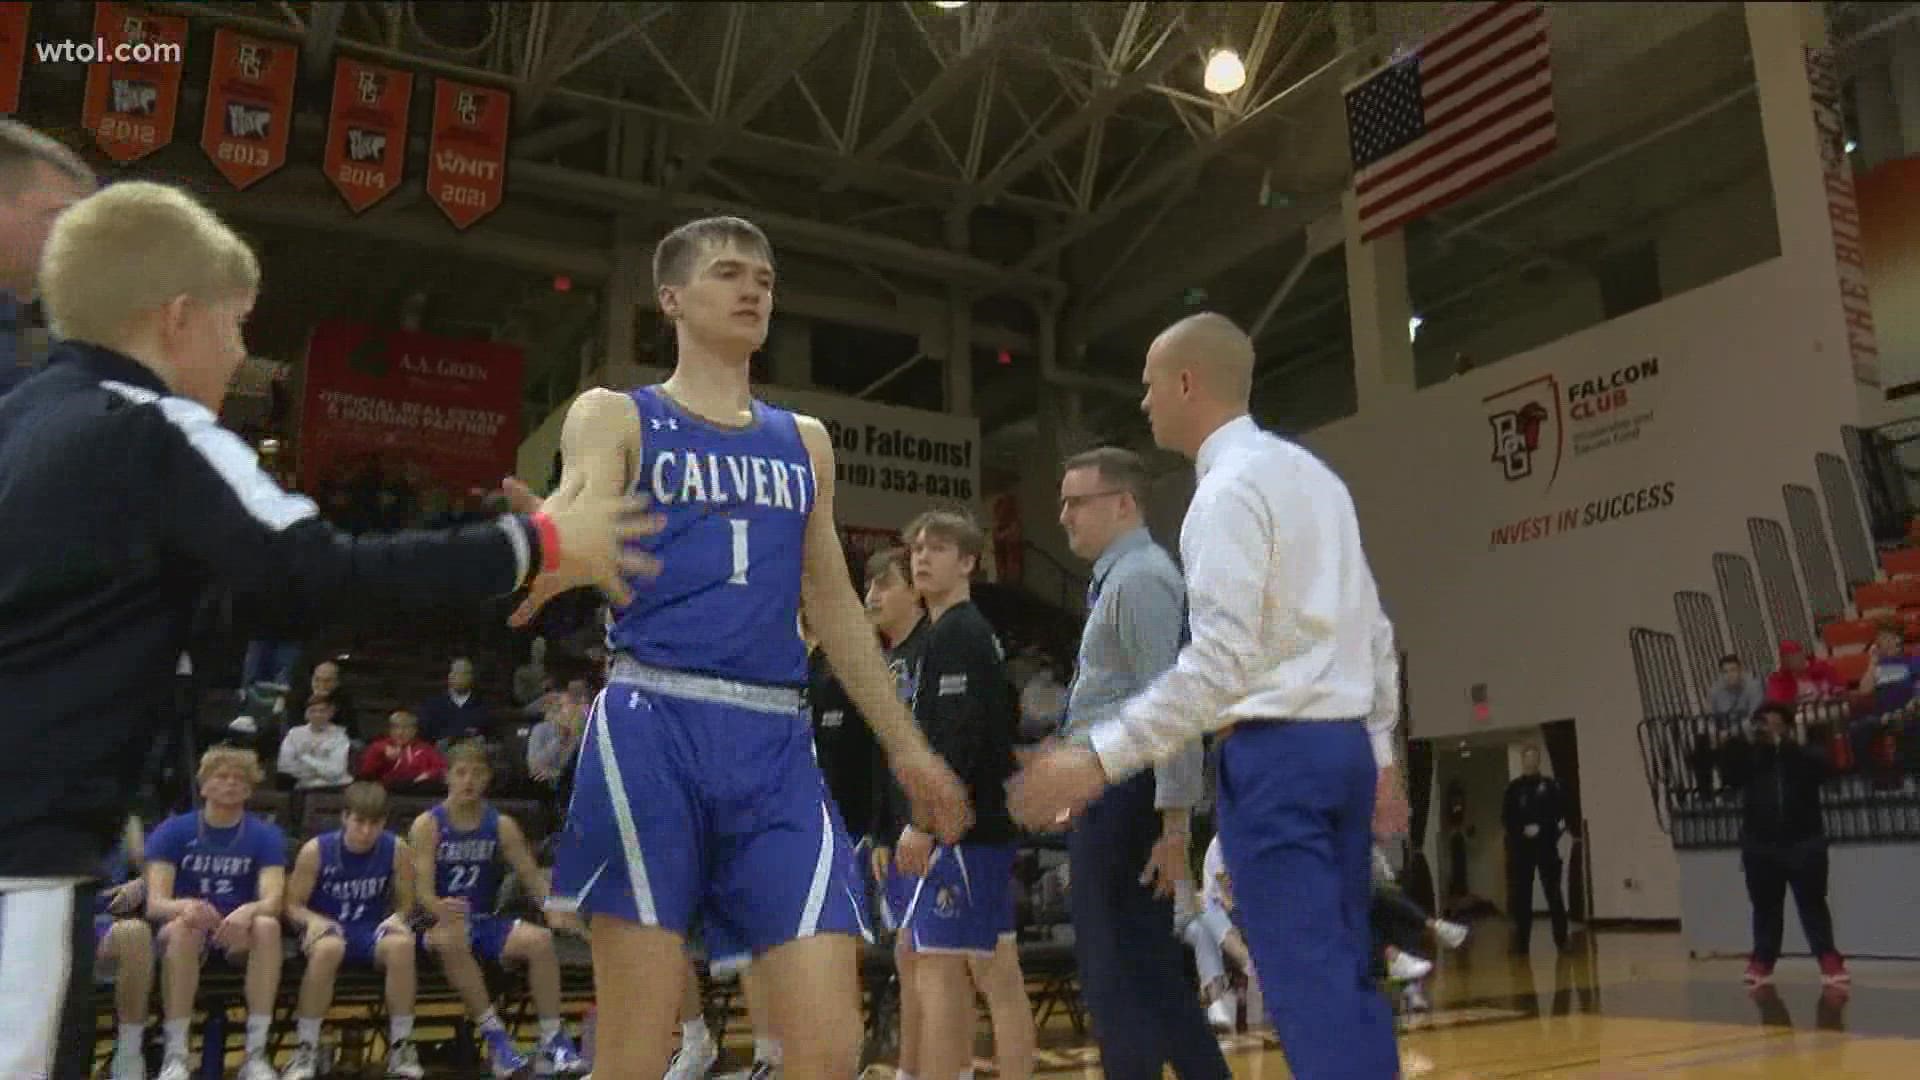 Calvert and Antwerp both win and will face each other Friday night in the Regional Final from Stroh Center.